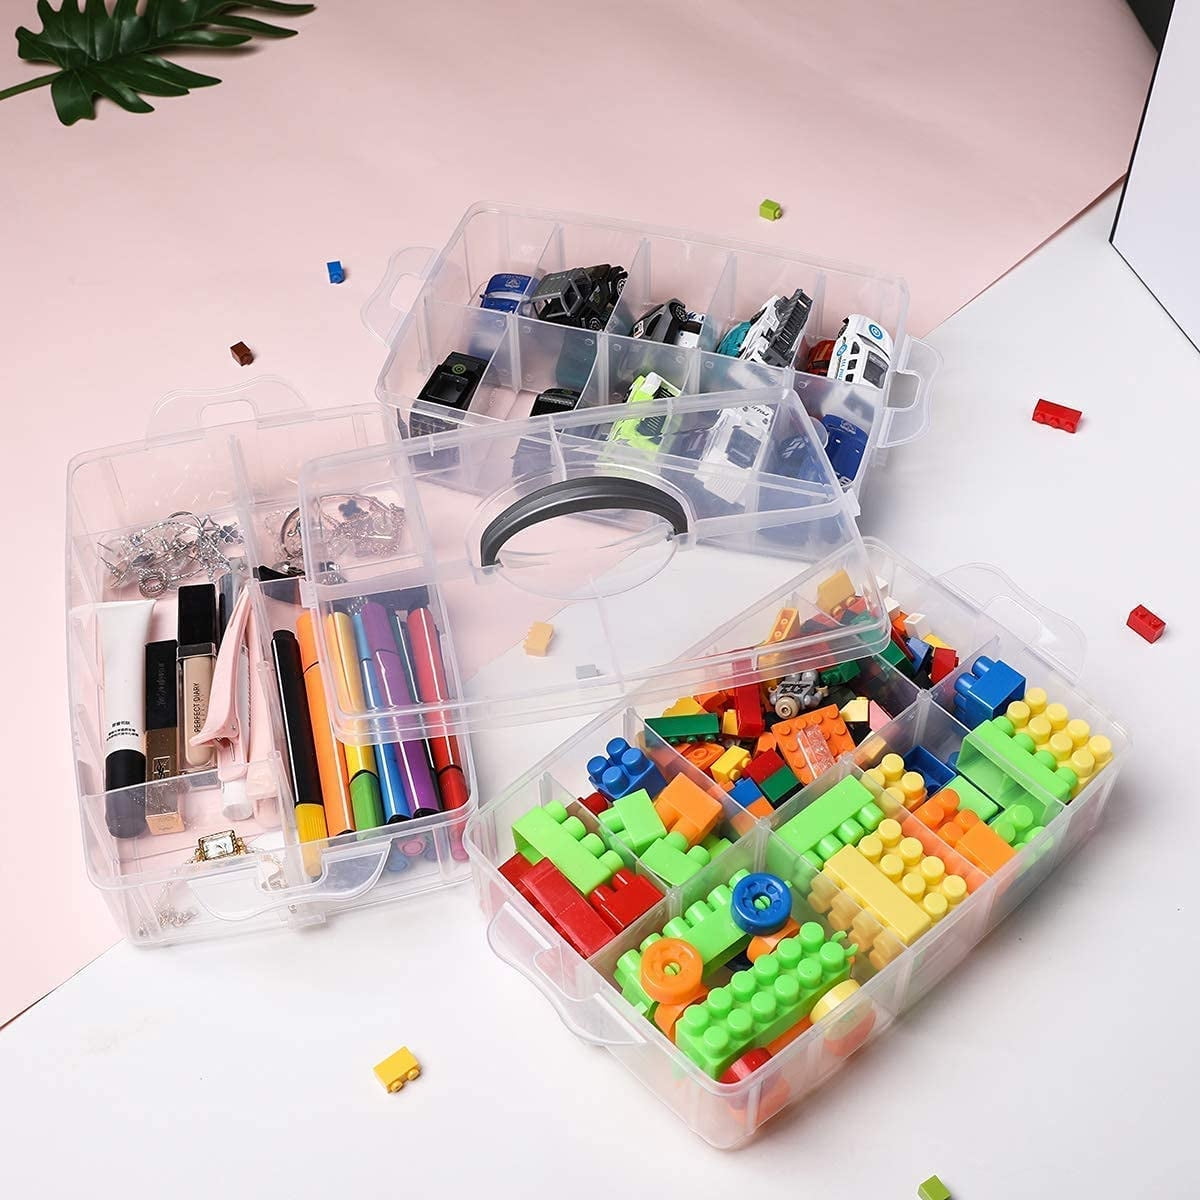 Mivofun Small Toys Storage Containers Set of 3, Organizers Bin with Brick  Shaped Lids, for Building Blocks Parts Puzzles Small Items Crafts Jewelry